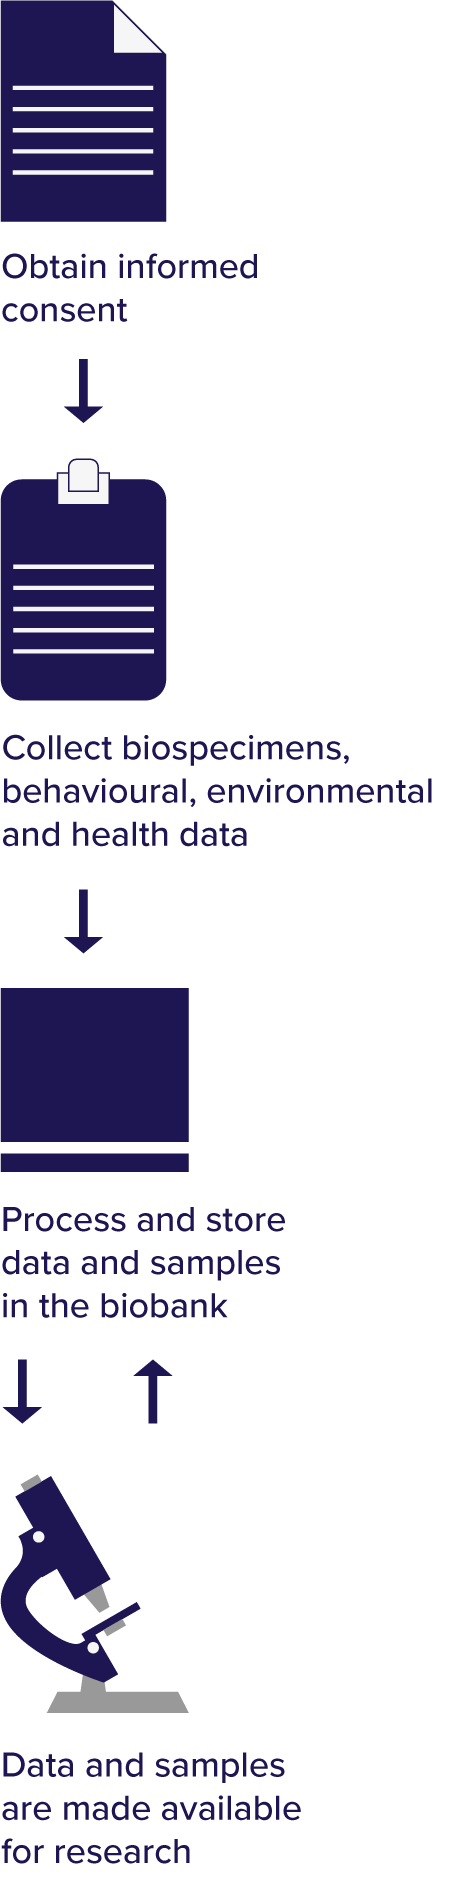 Infographic showing a flow of improving data and samples. First, obtain informed consent. Second, collect biospecimens, behavioural, environmental and health data. Third, process and store data and samples in the Biobank. Fourth, data and samples are made available for research. There's a back and forth arrow between the third and fourth step, showing how the data is improved with use.